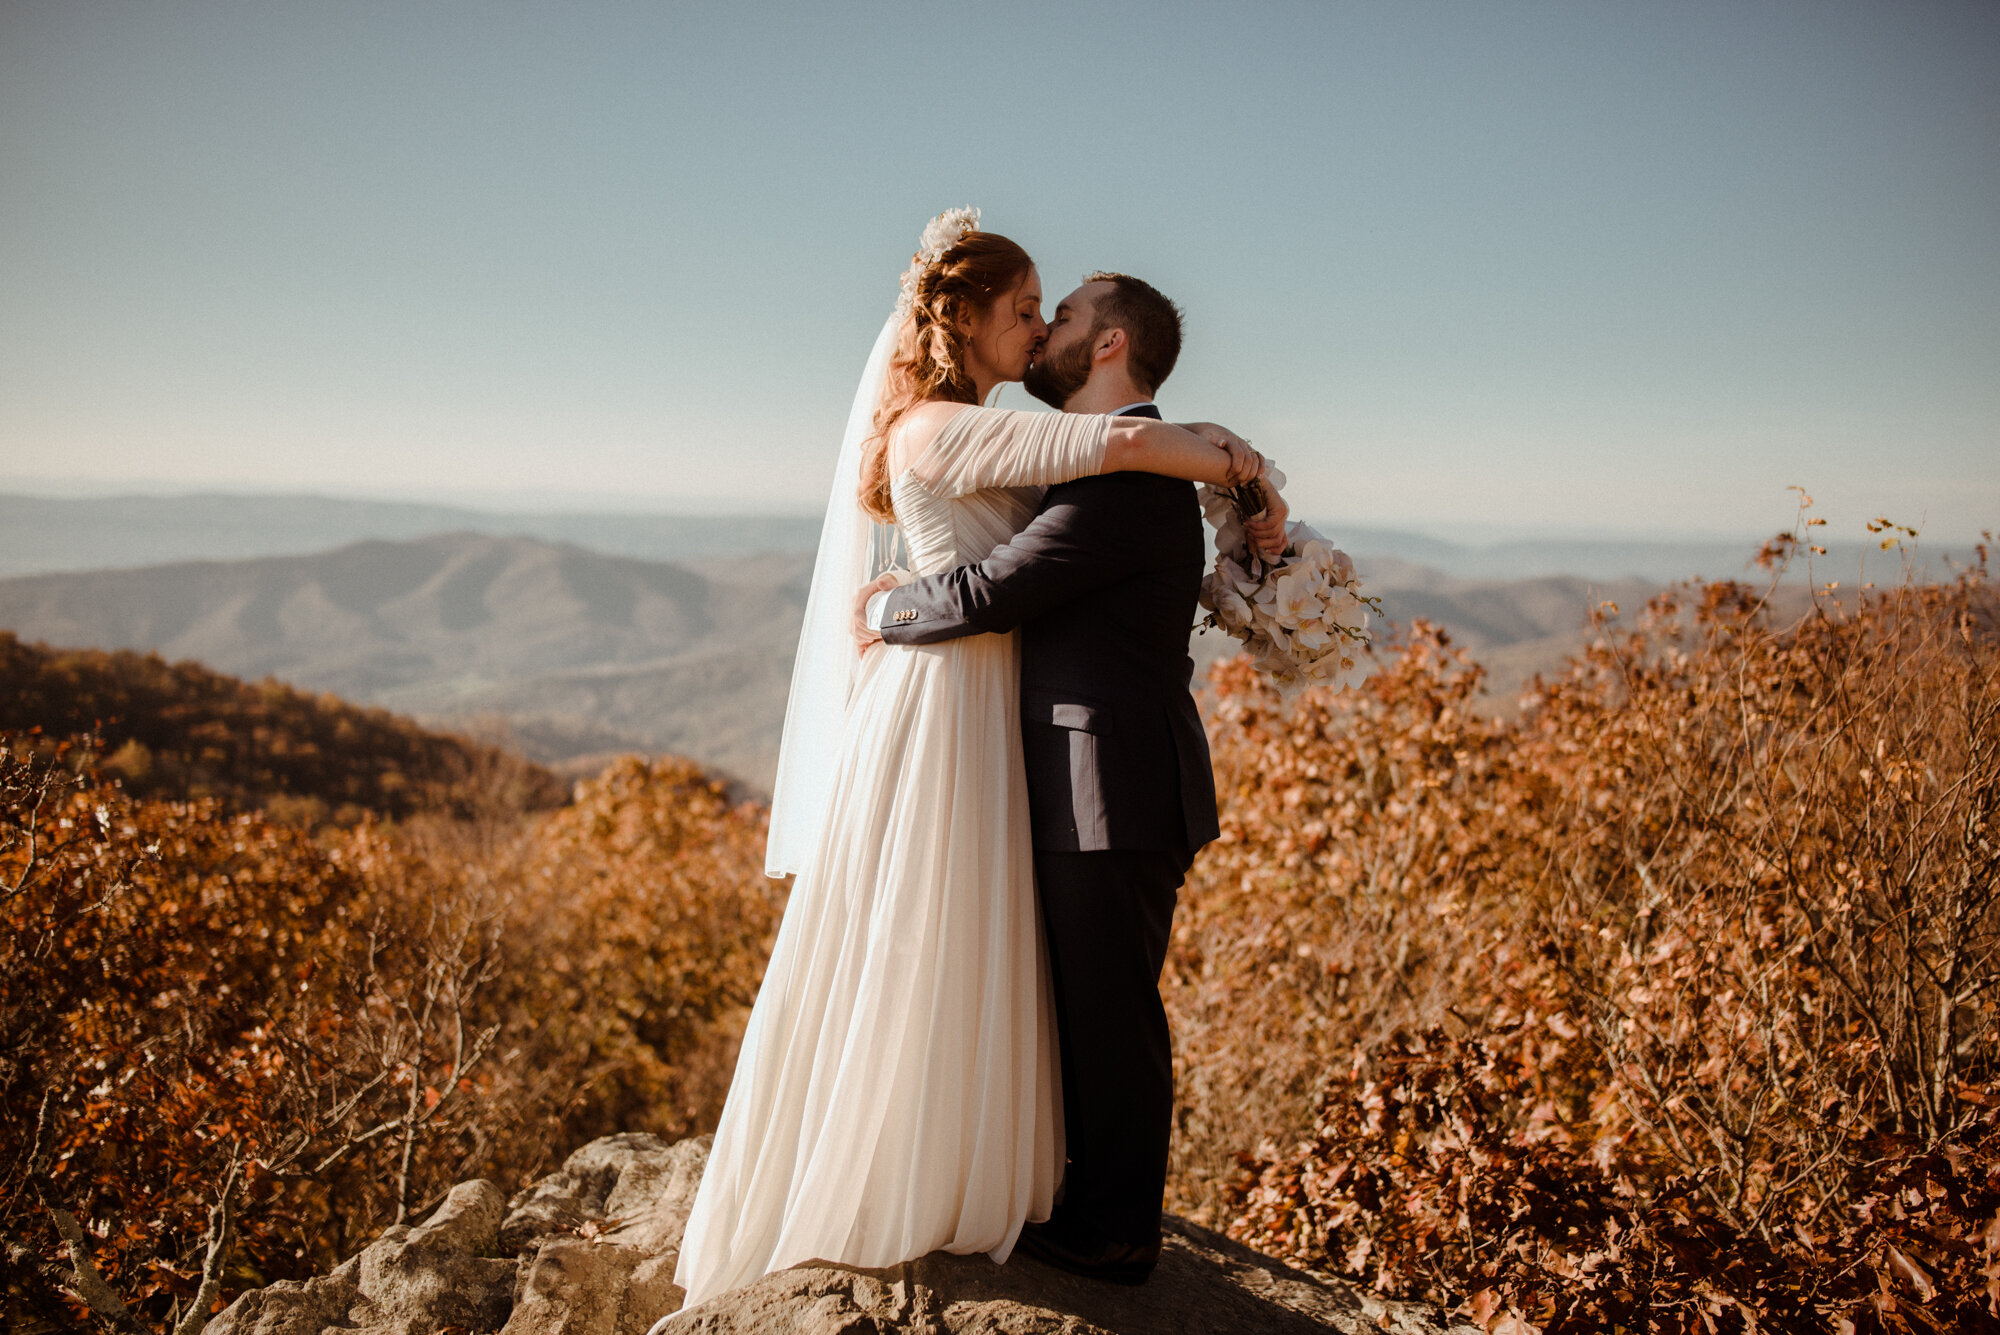 Emily and Ryan - Mountain Top Elopement - Shenandoah National Park - Blue Ridge Mountains Couple Photo Shoot in the Fall - White Sails Creative_18.jpg